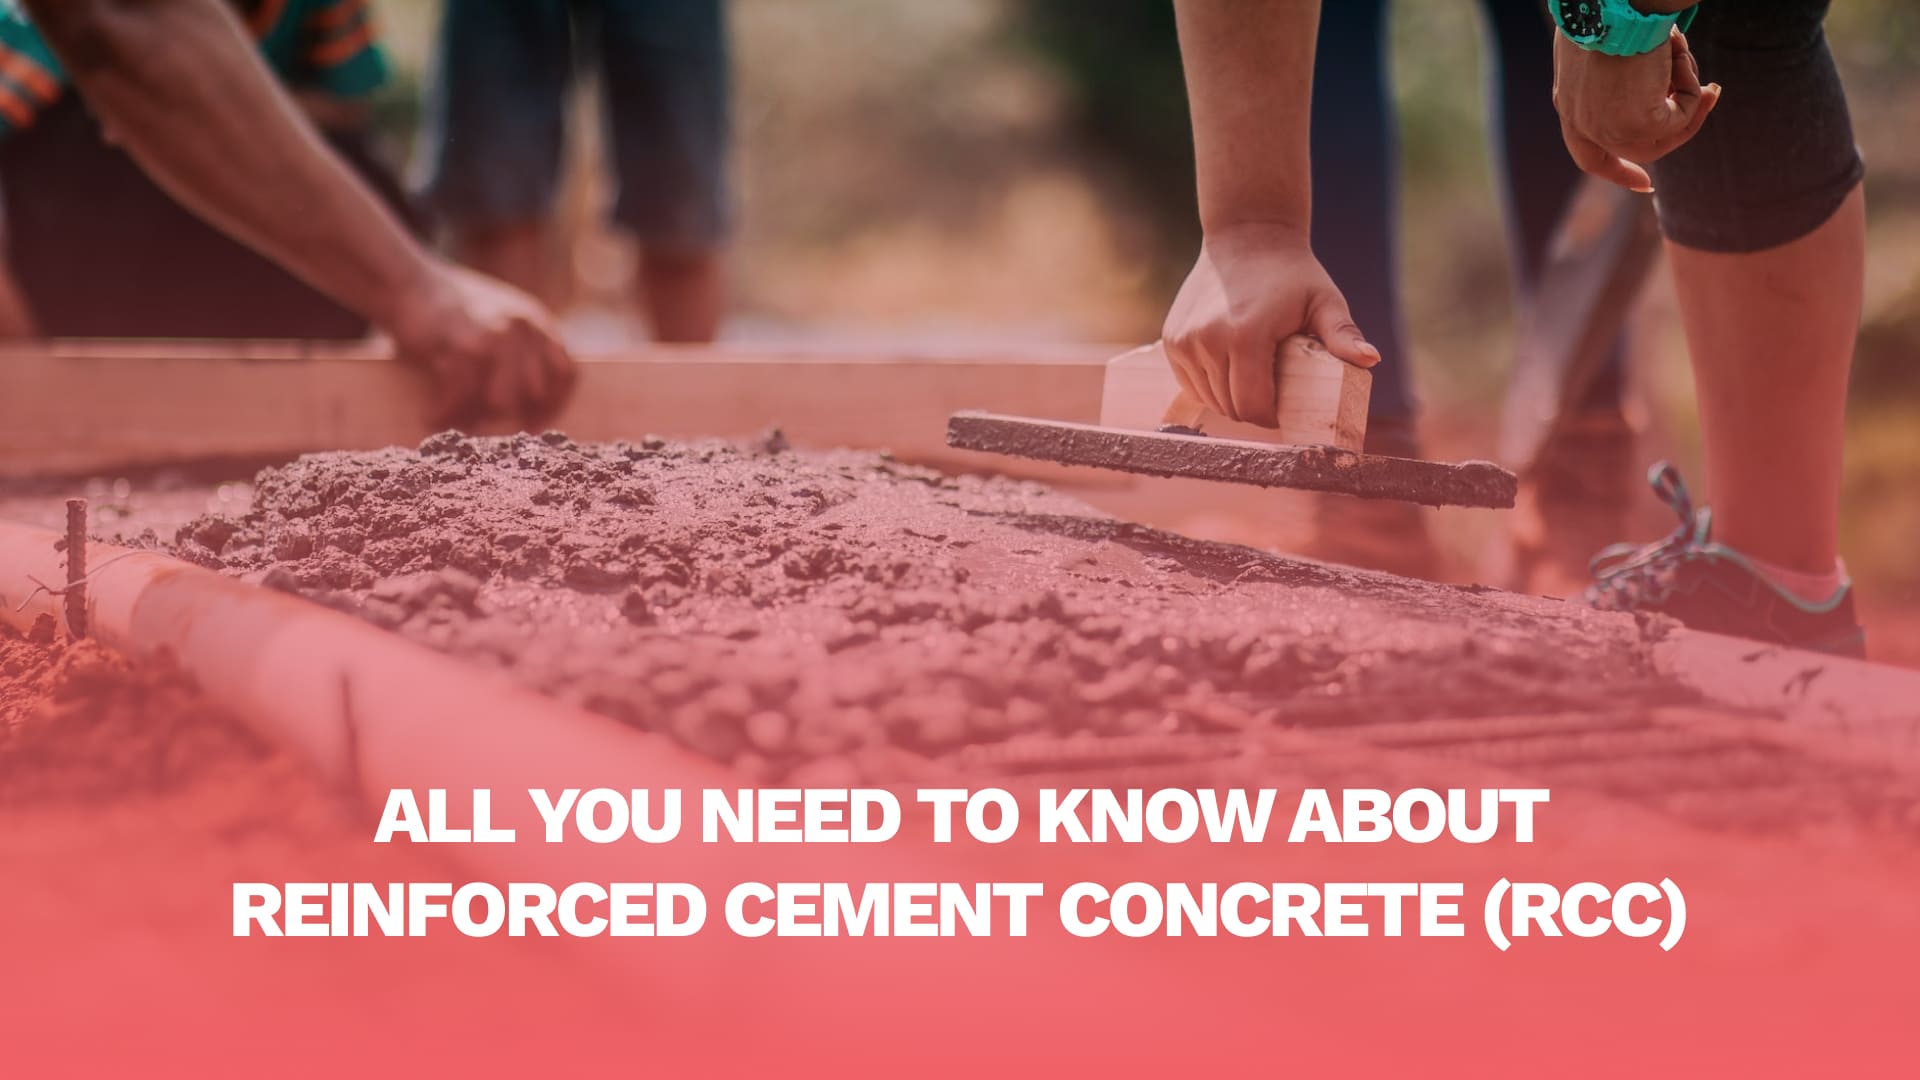 All You Need To Know About Reinforced Cement Concrete (RCC)